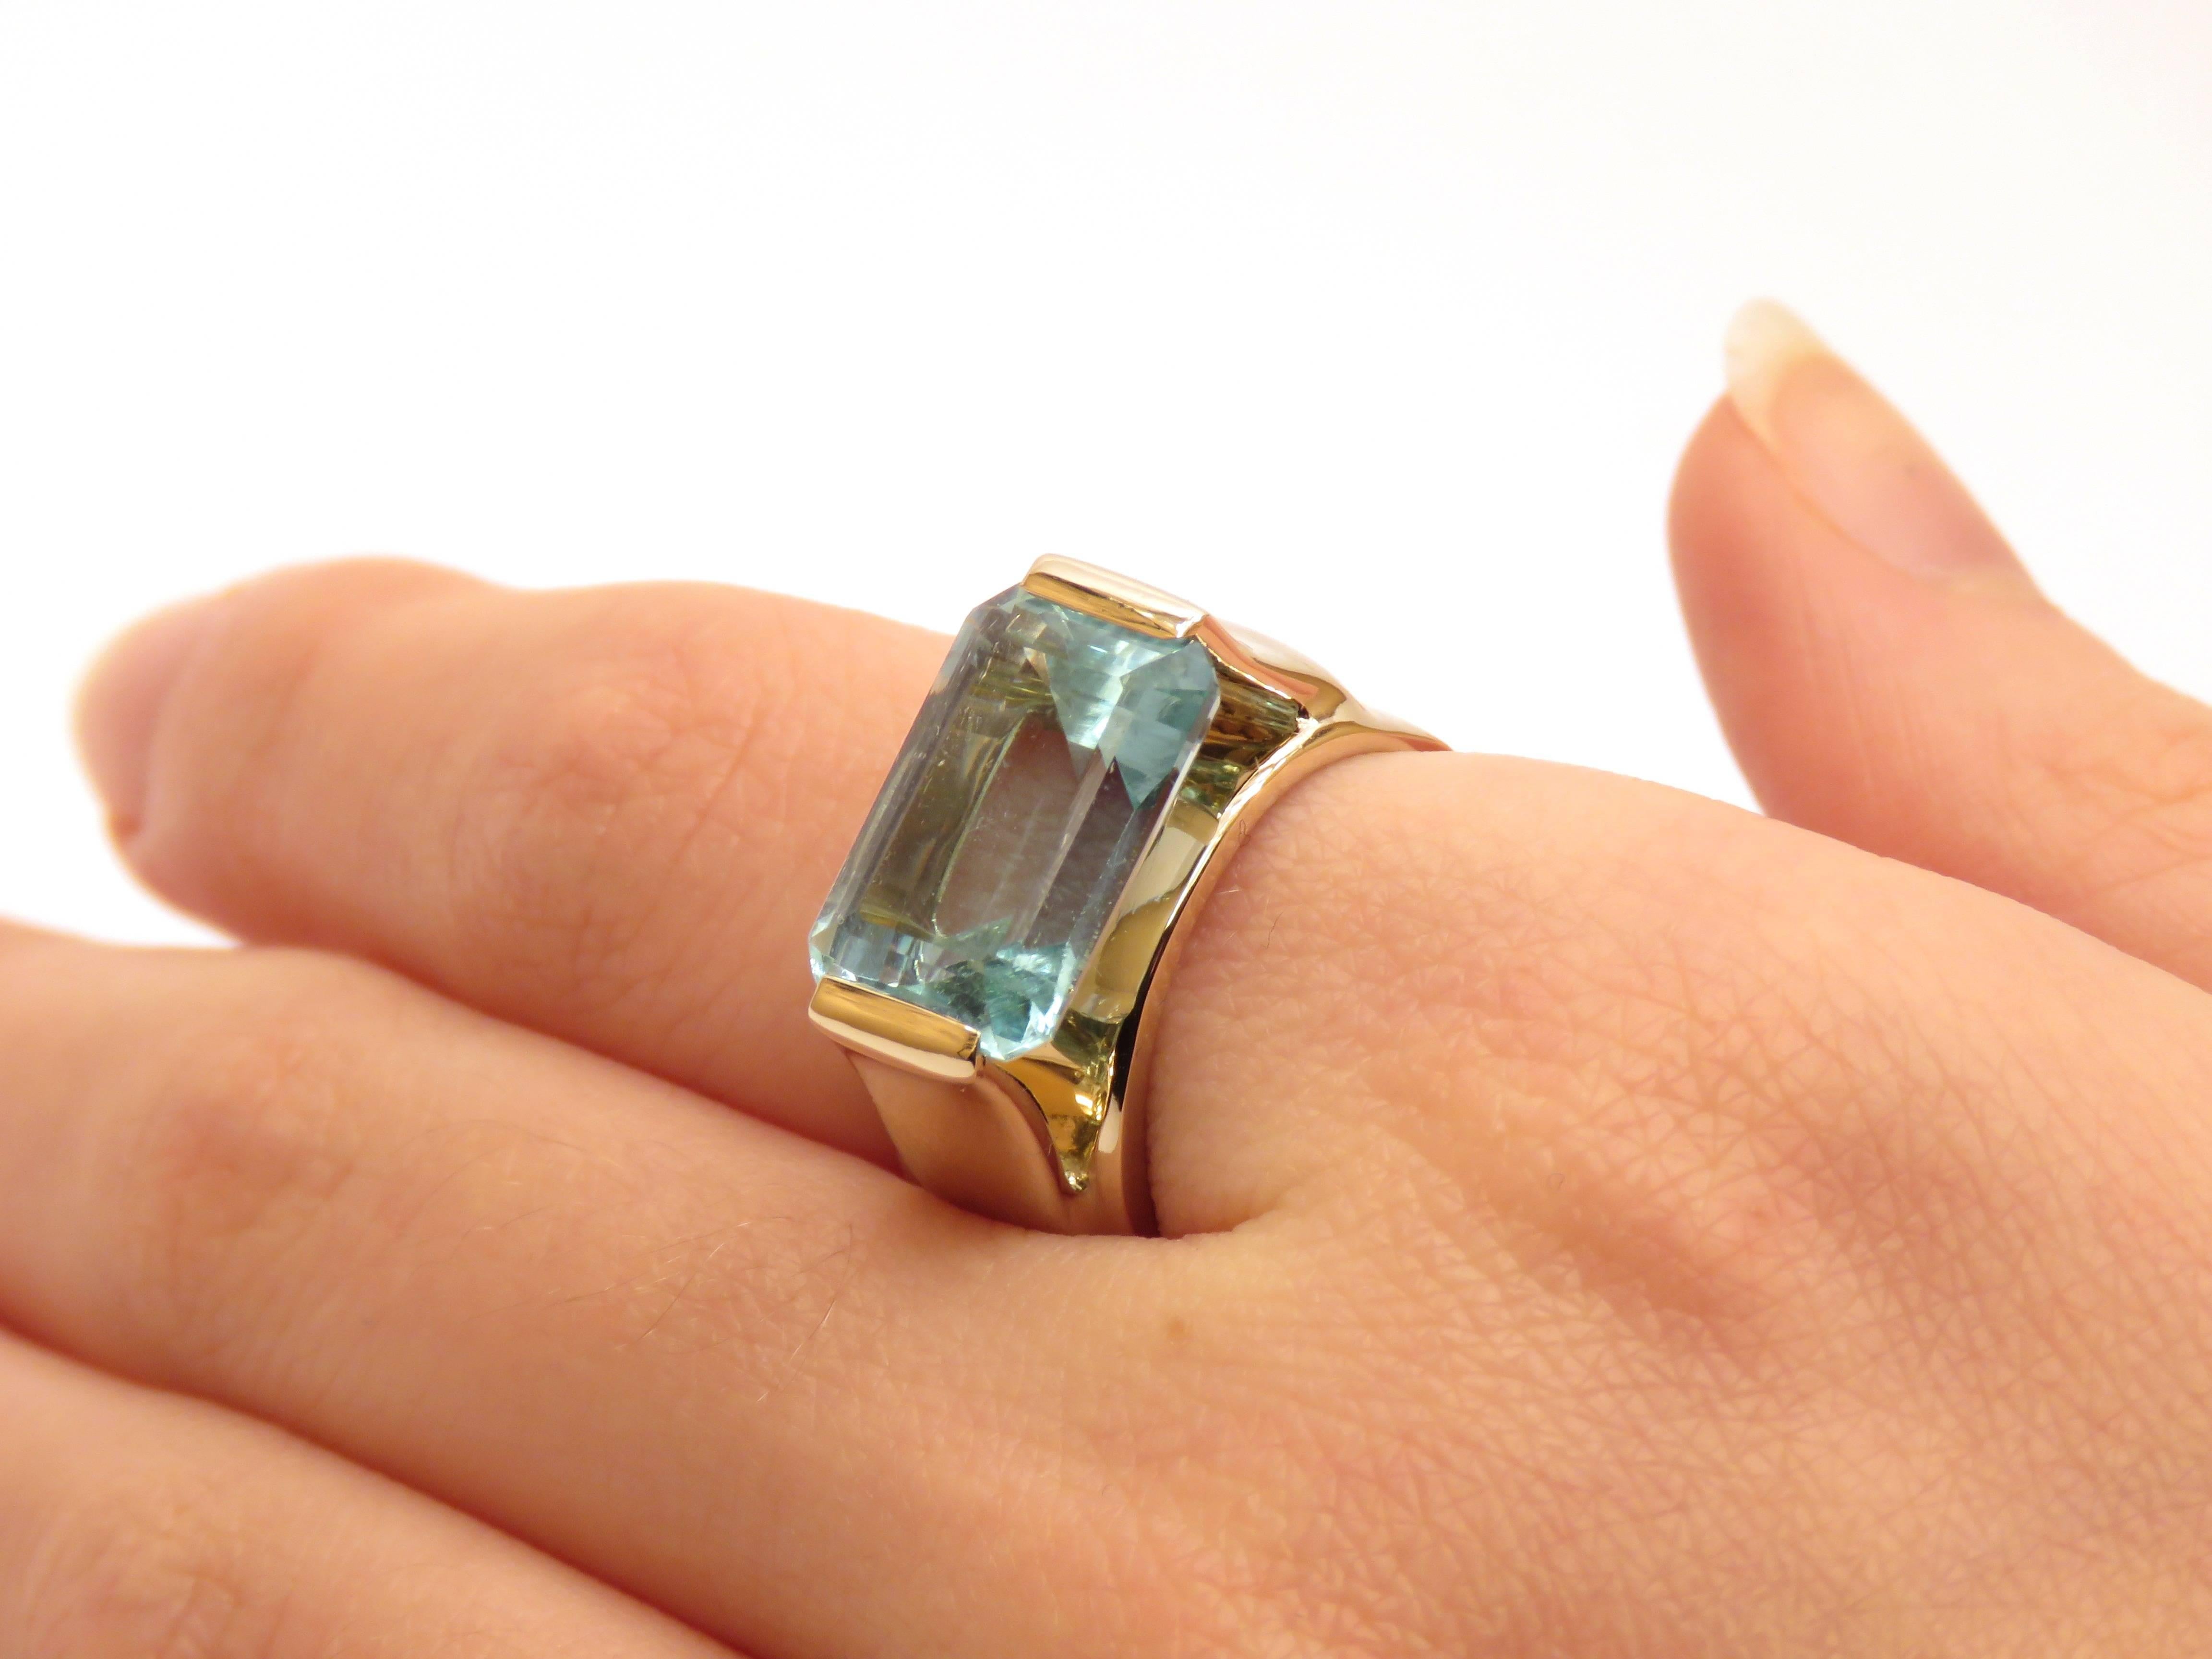 Modern Aquamarine White 18 Kt Gold Cocktail Ring Handcrafted in Italy by Botta Gioielli